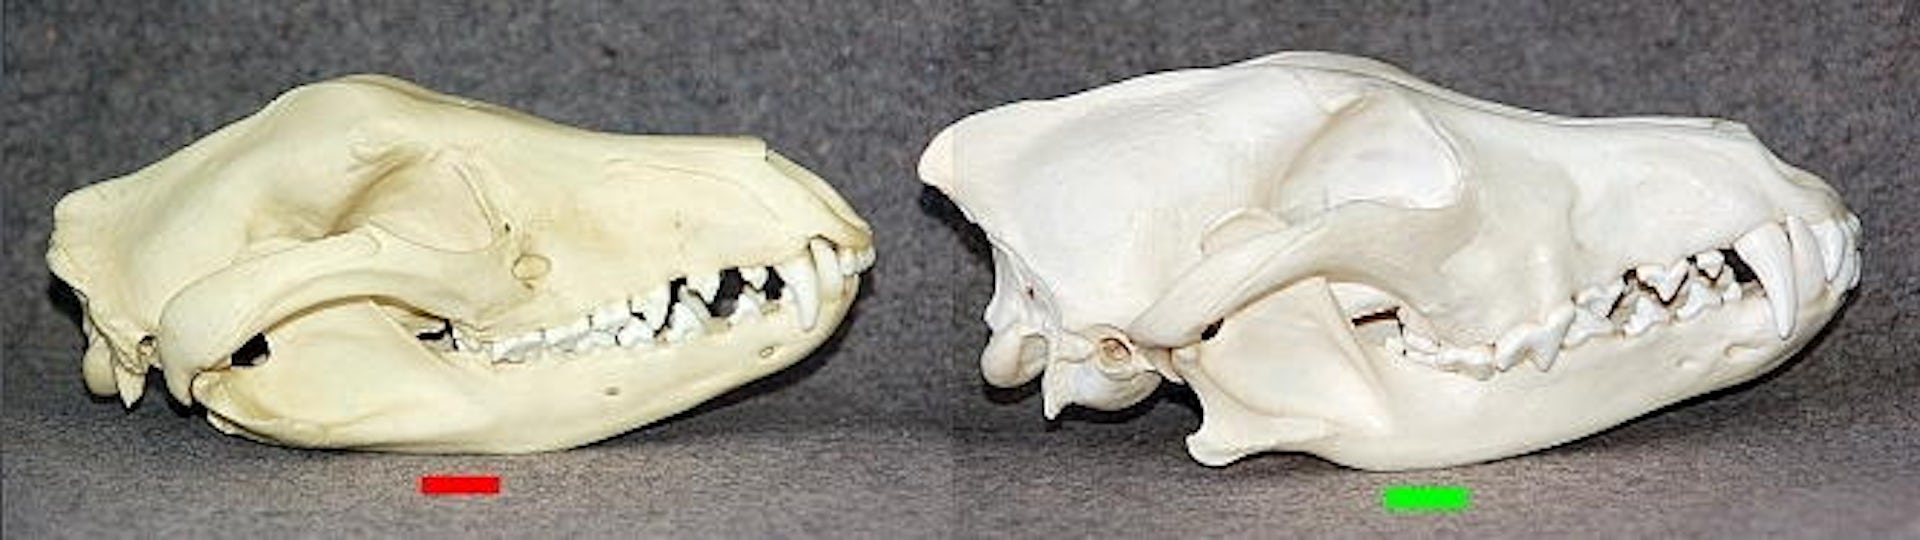 Skulls of the marsupial thylacine (left) and placental wolf (right) show striking convergence